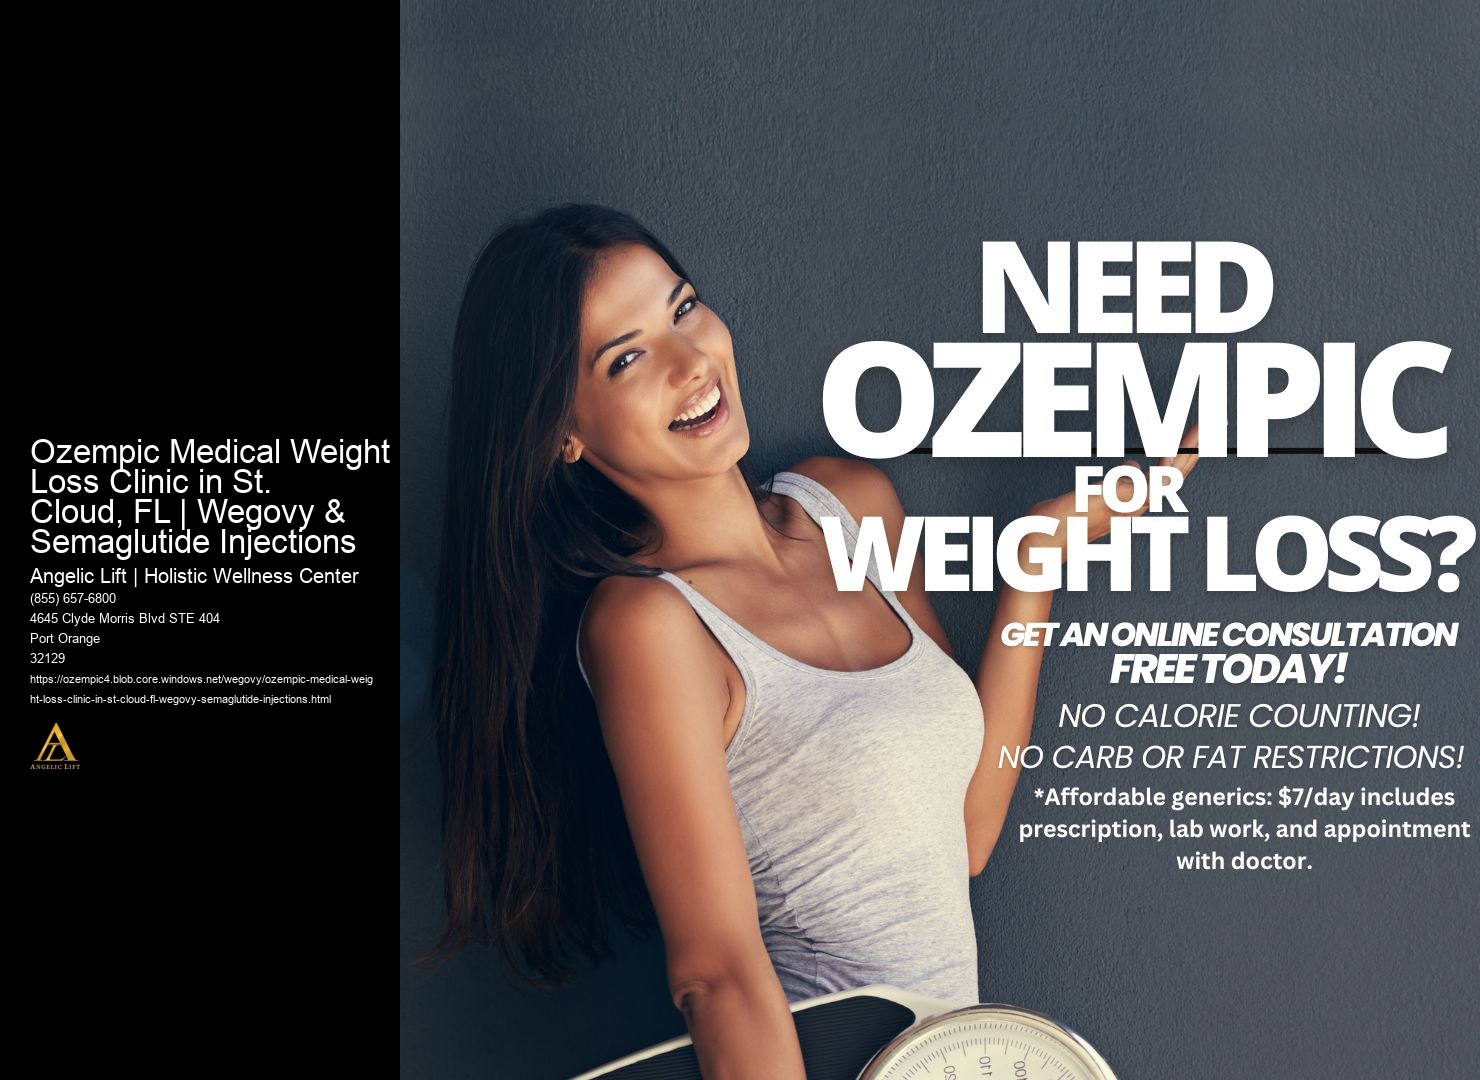 Ozempic Medical Weight Loss Clinic in St. Cloud, FL | Wegovy & Semaglutide Injections